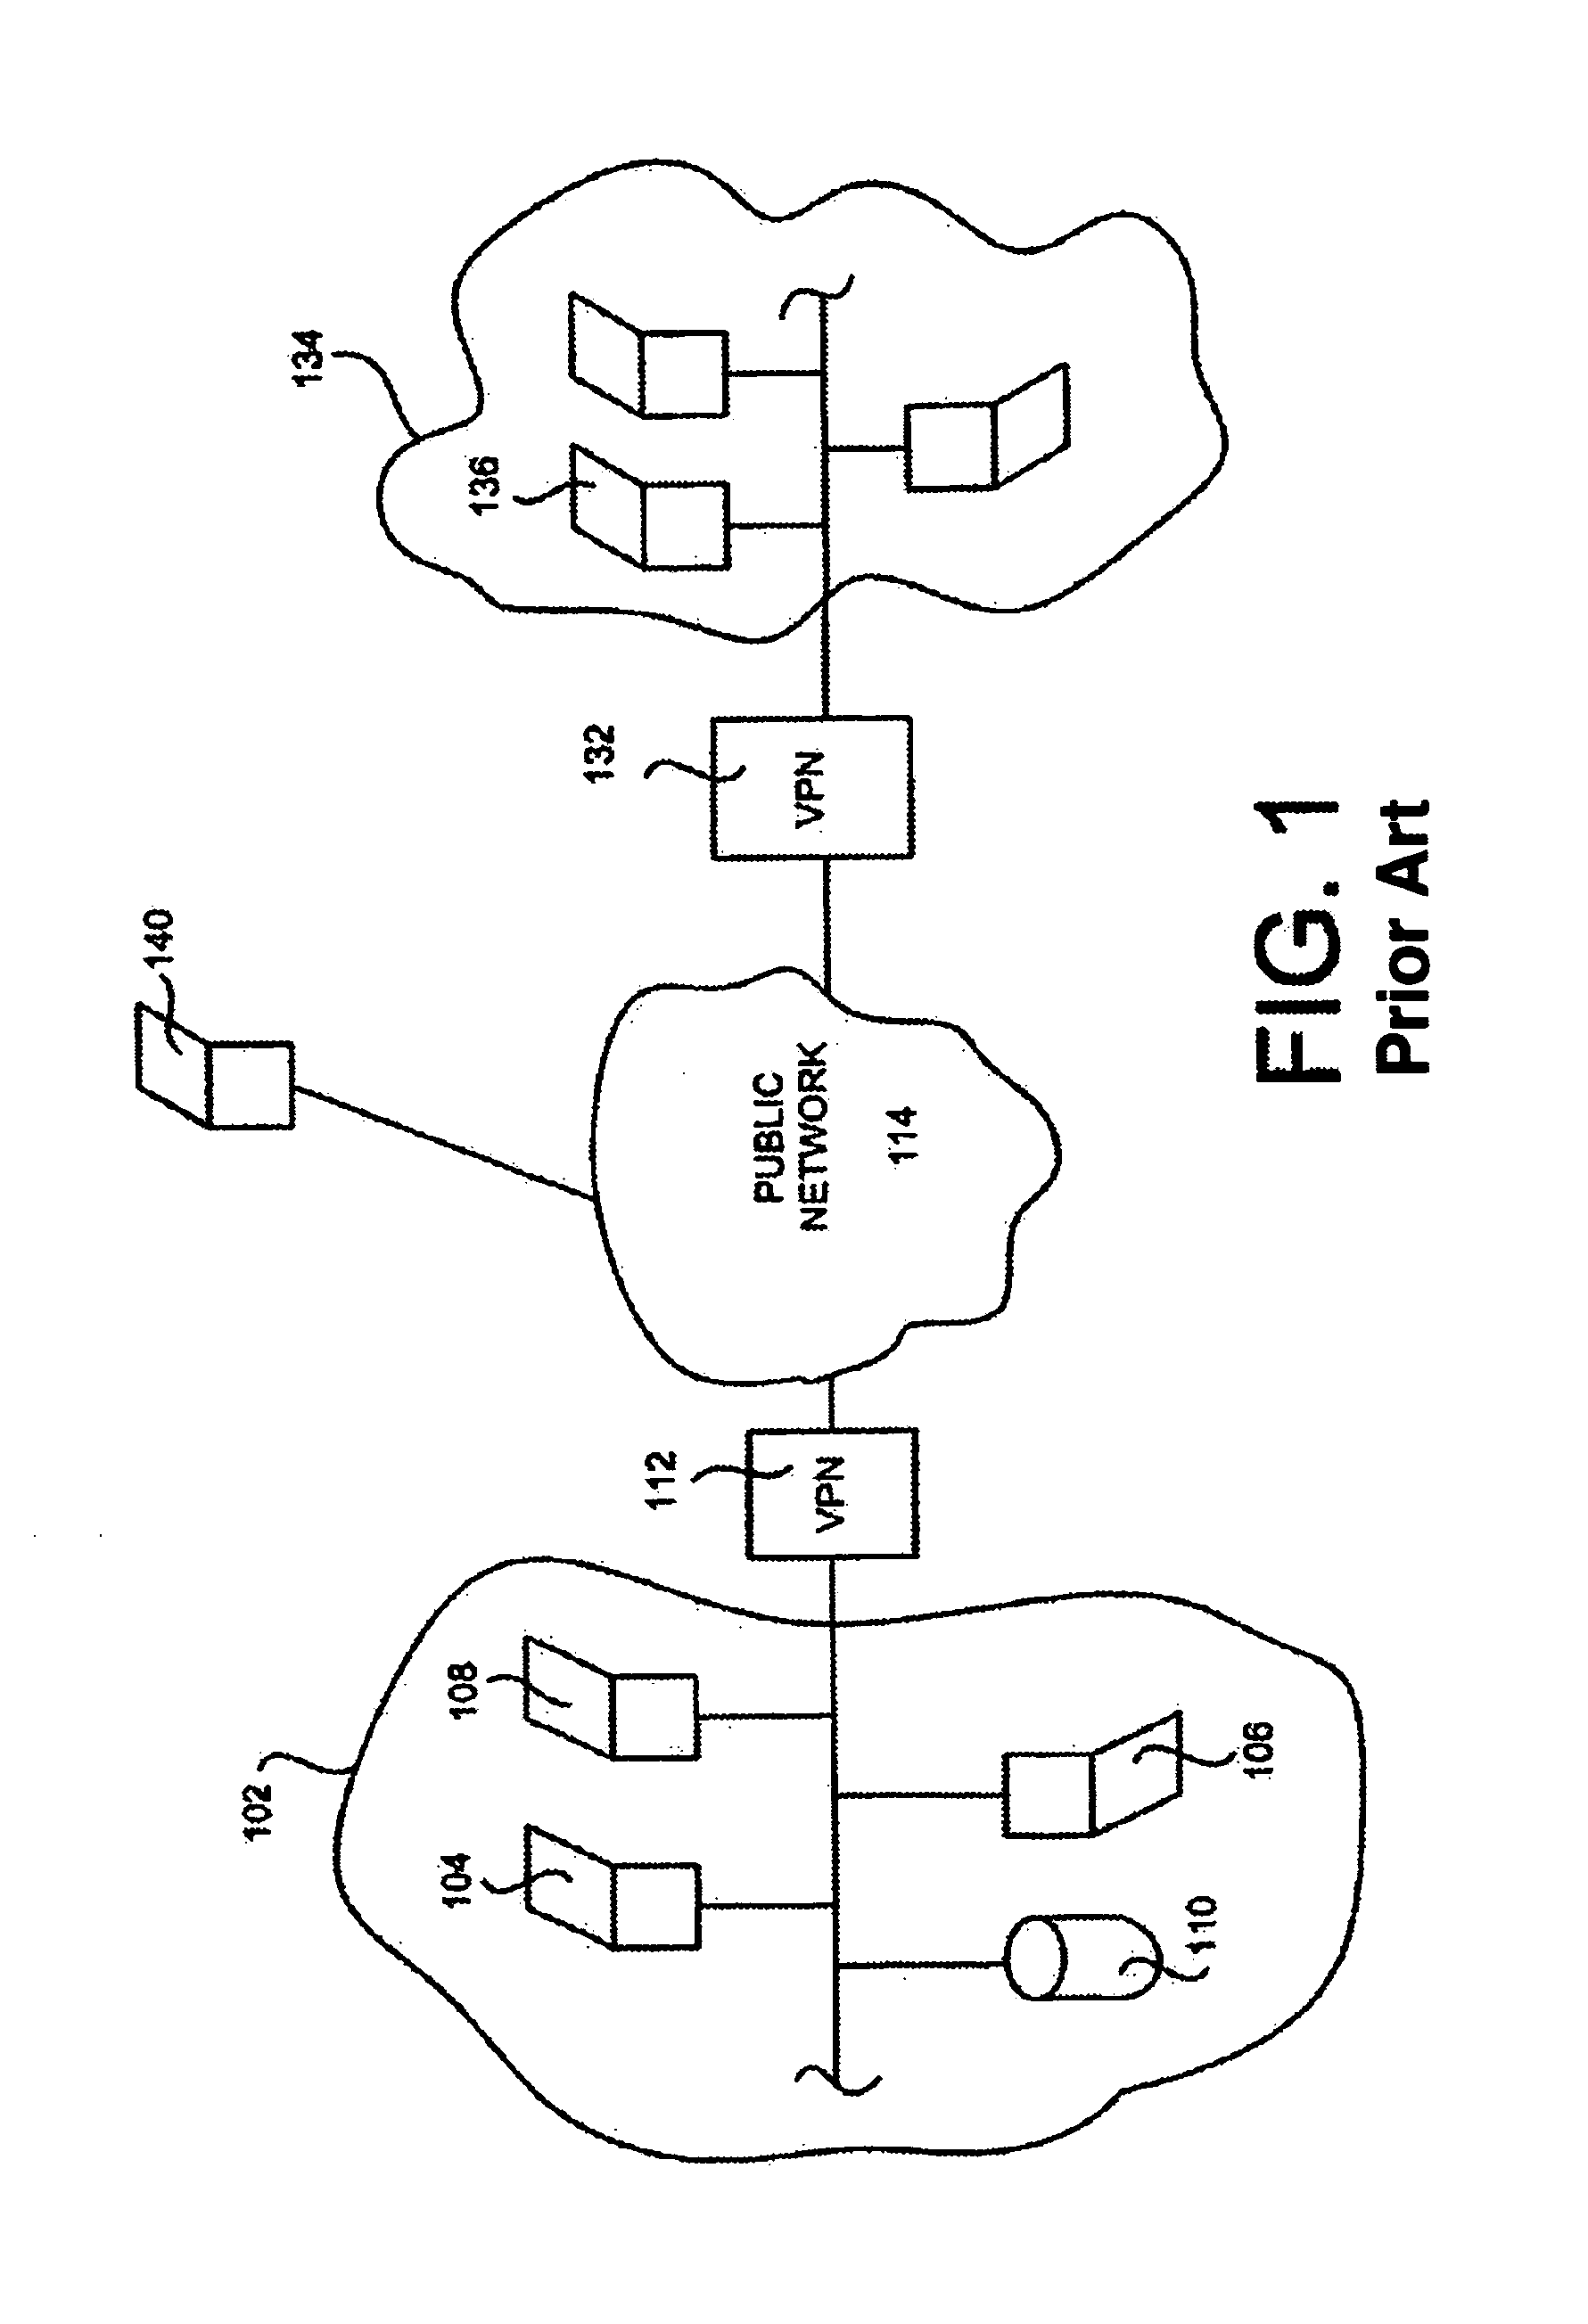 Systems and methods for implementing host-based security in a computer network